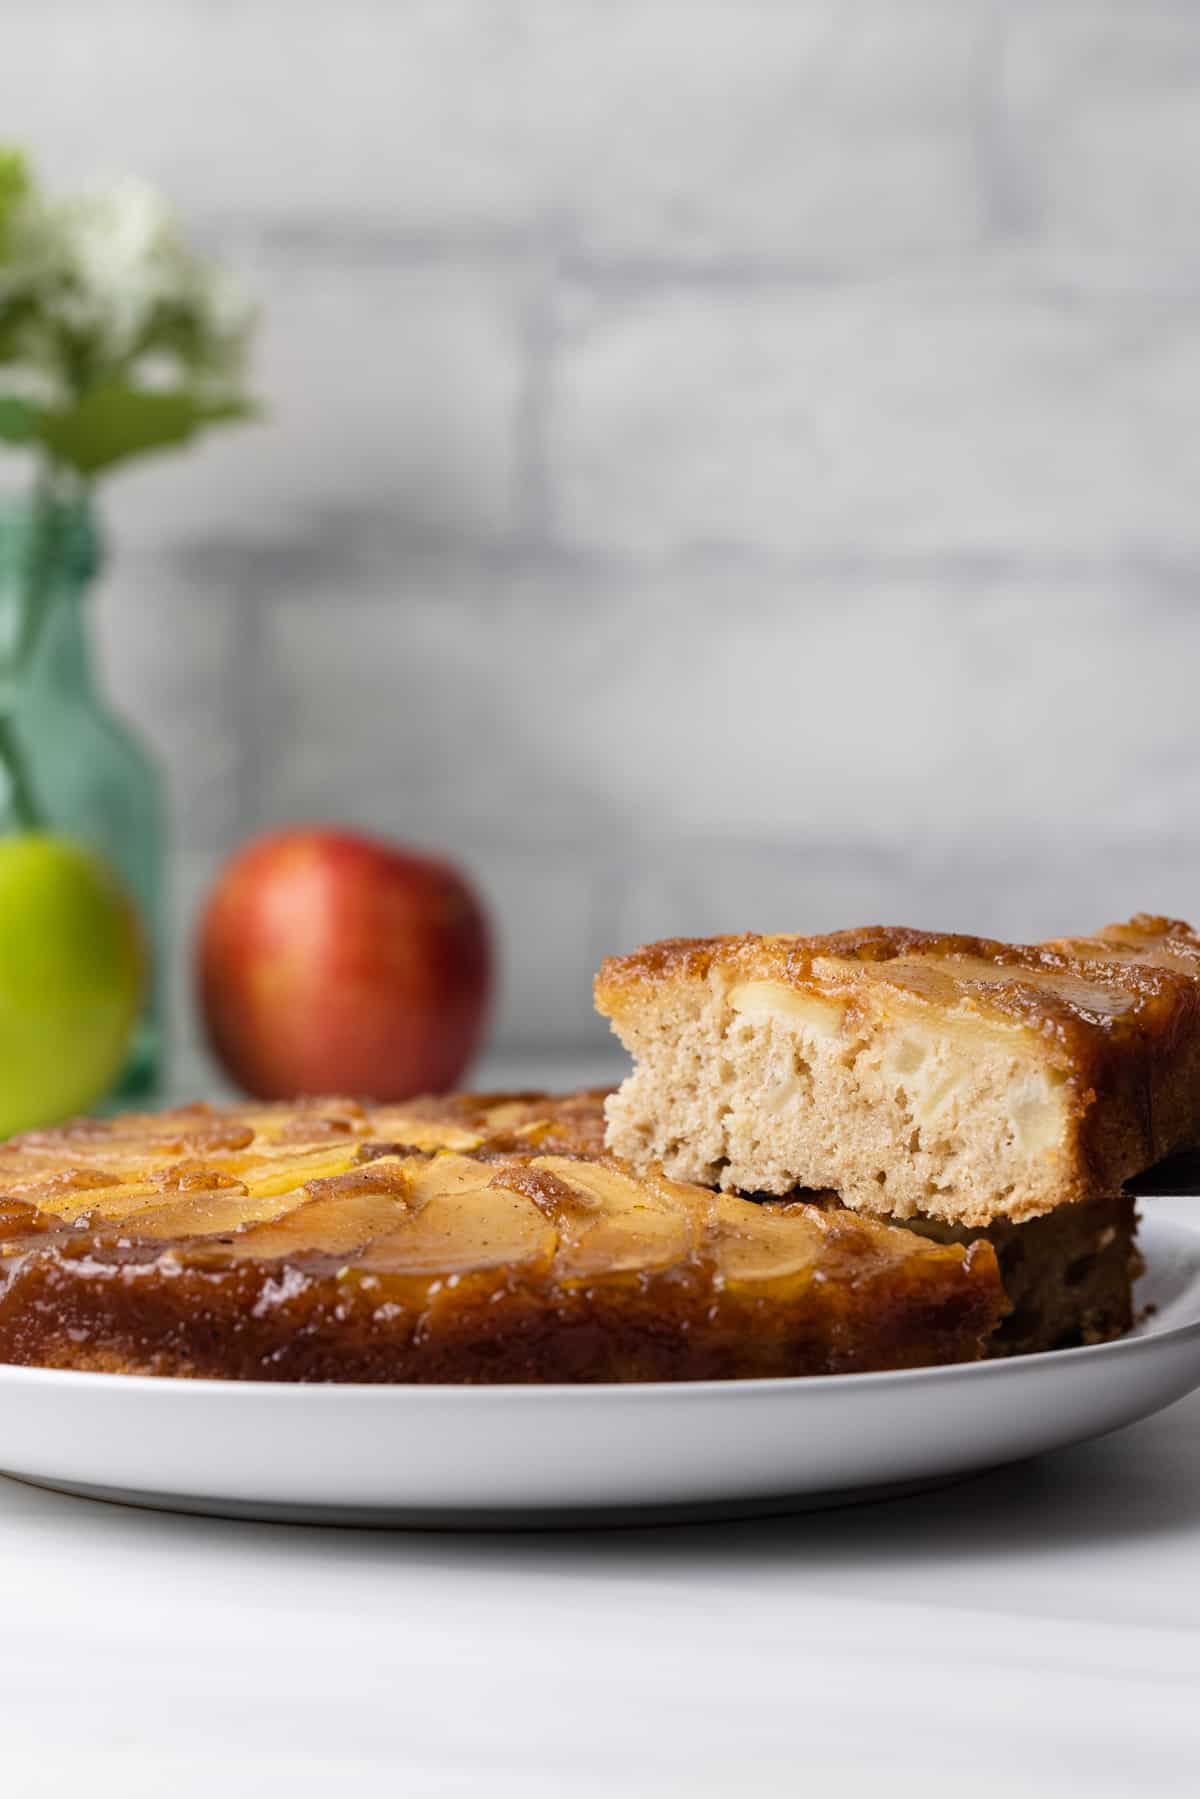 Apple upside down cake with a slice being served